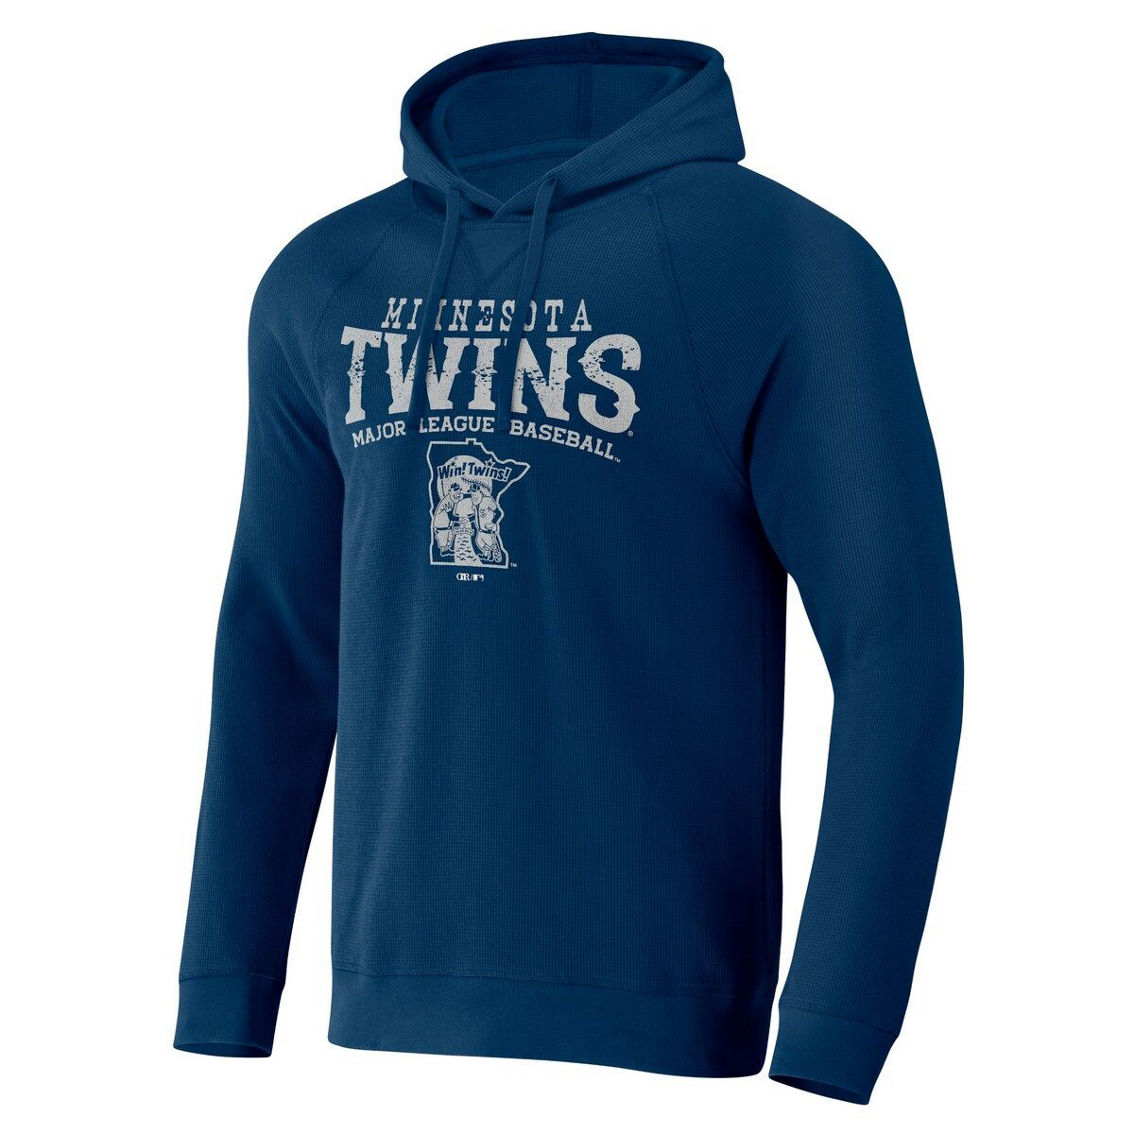 Darius Rucker Collection by Fanatics Men's Darius Rucker Collection by Fanatics Navy Minnesota Twins Waffle-Knit Raglan Pullover Hoodie - Image 3 of 4